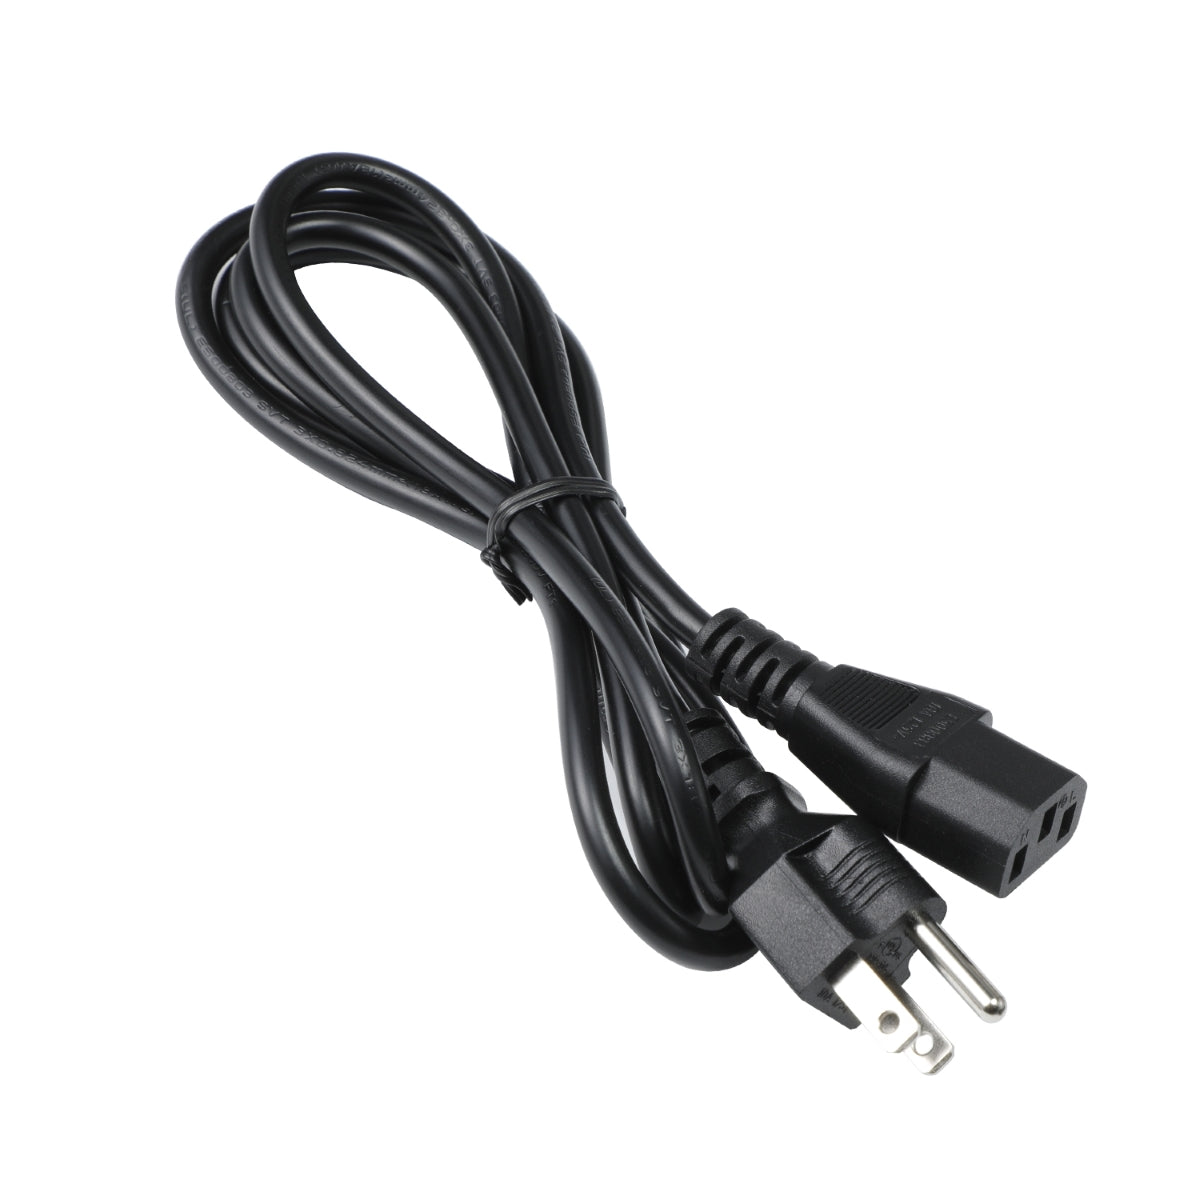 Power Cord for HP 24mh Monitor